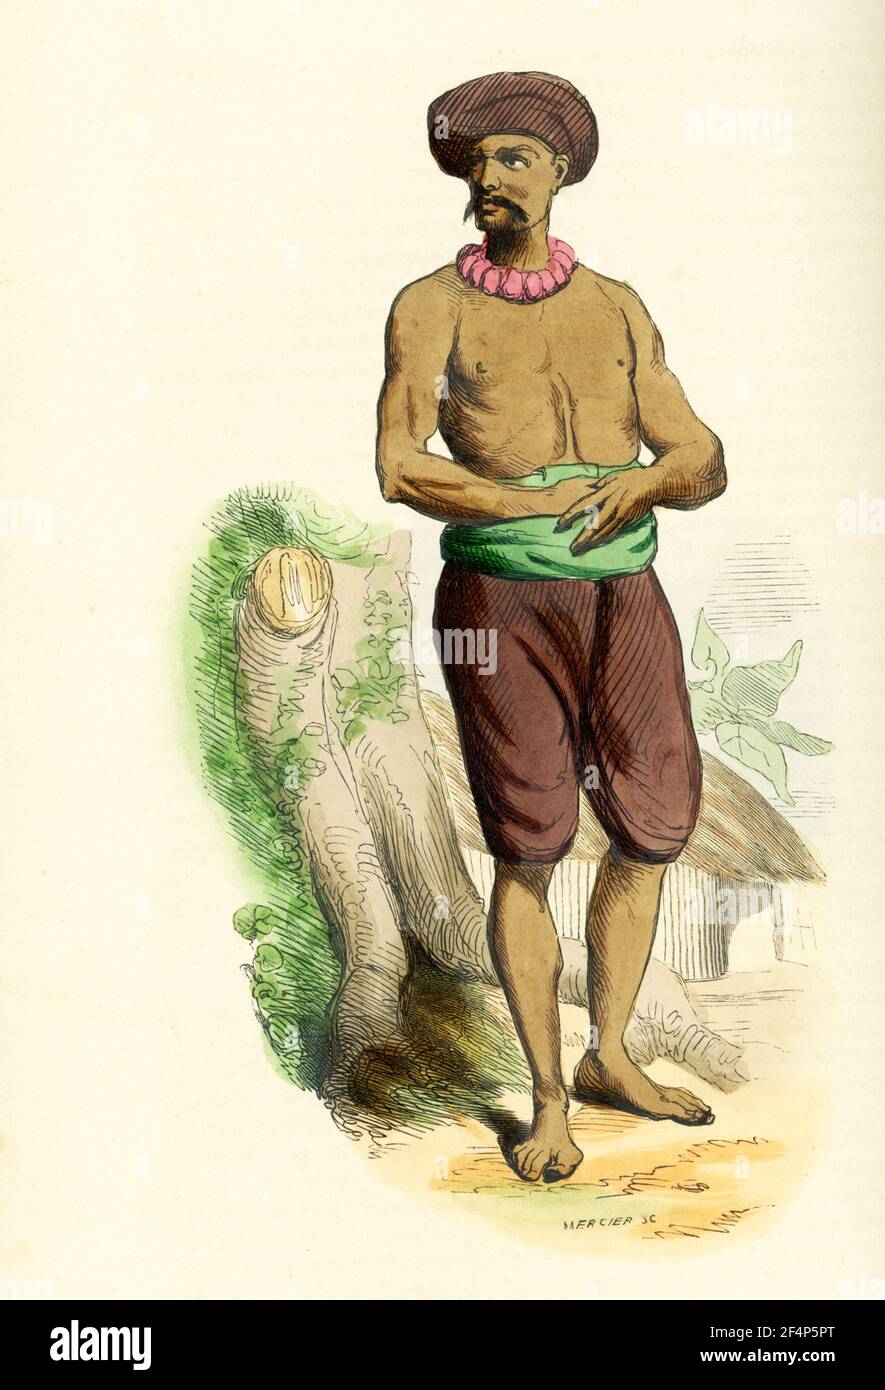 This 1840s illustration shows a Hindustani or Indian Common Man Stock Photo